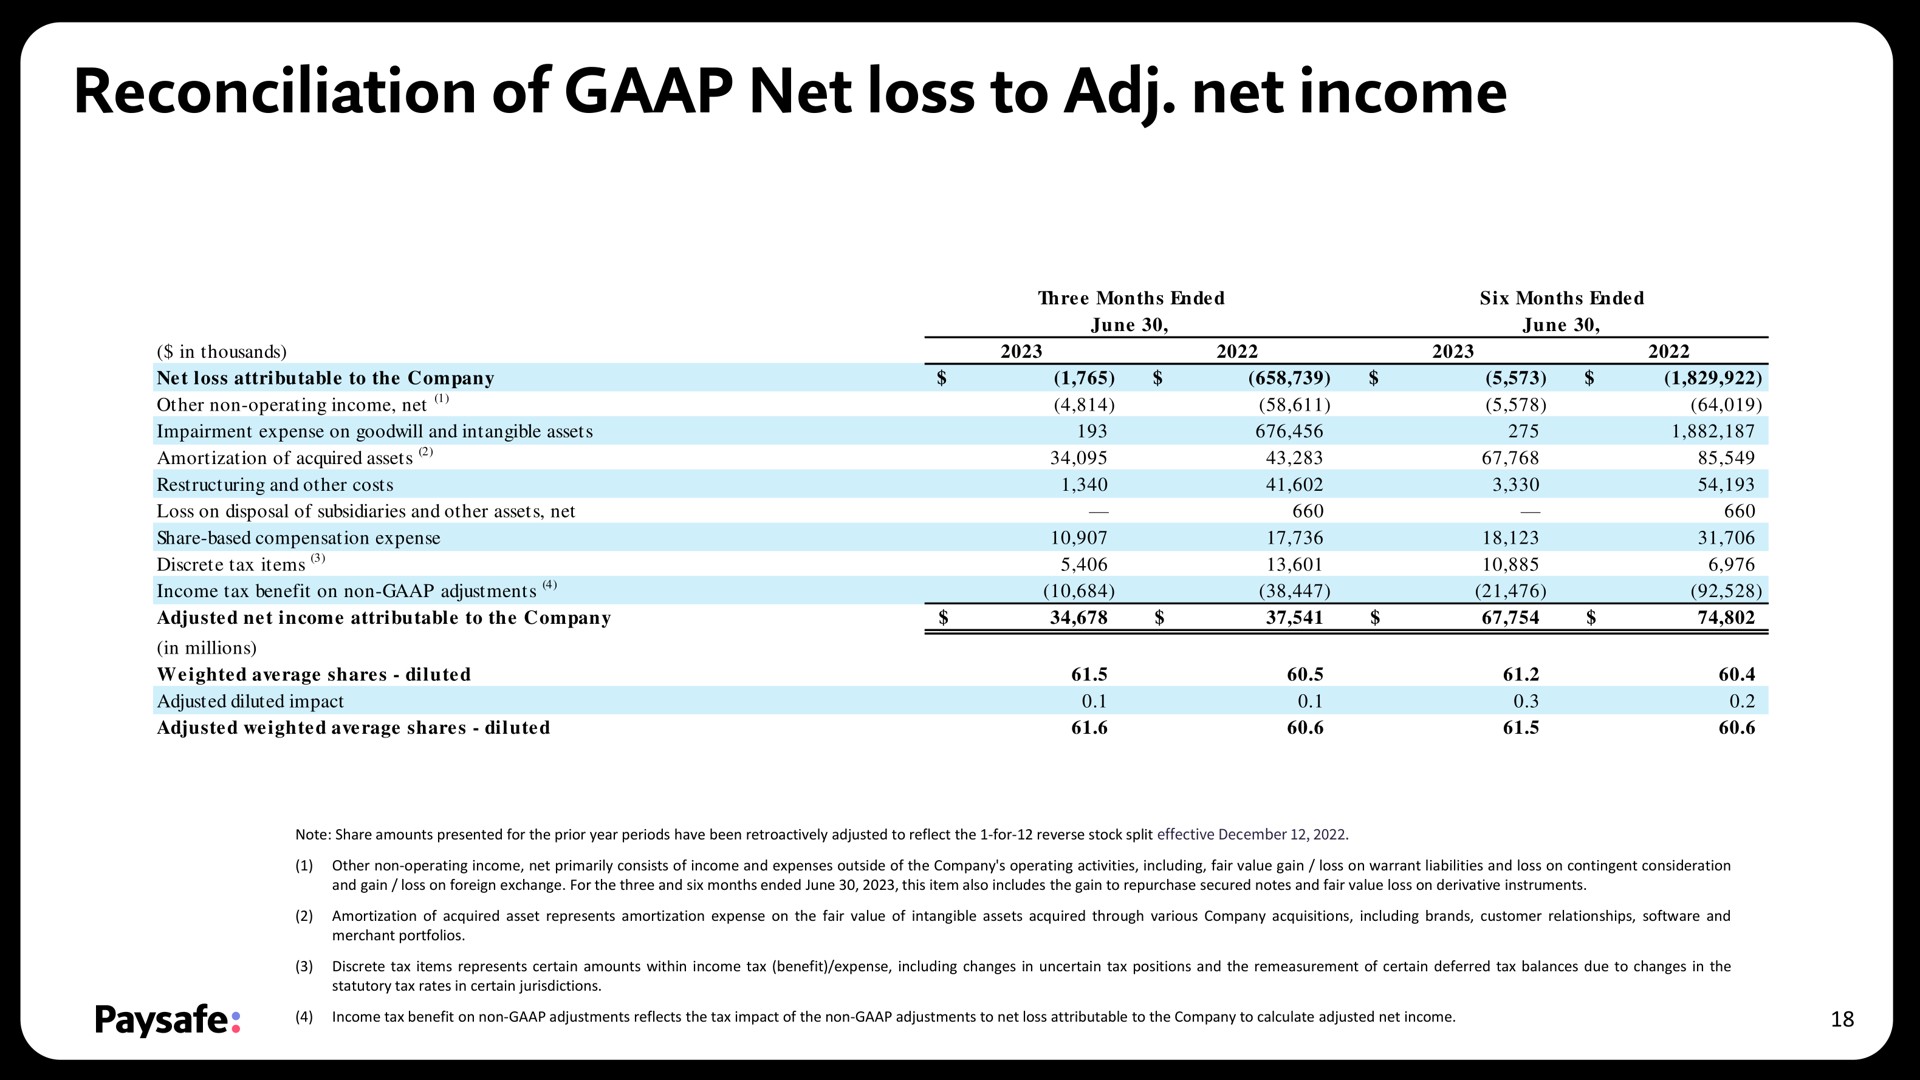 reconciliation of net loss to net income | Paysafe